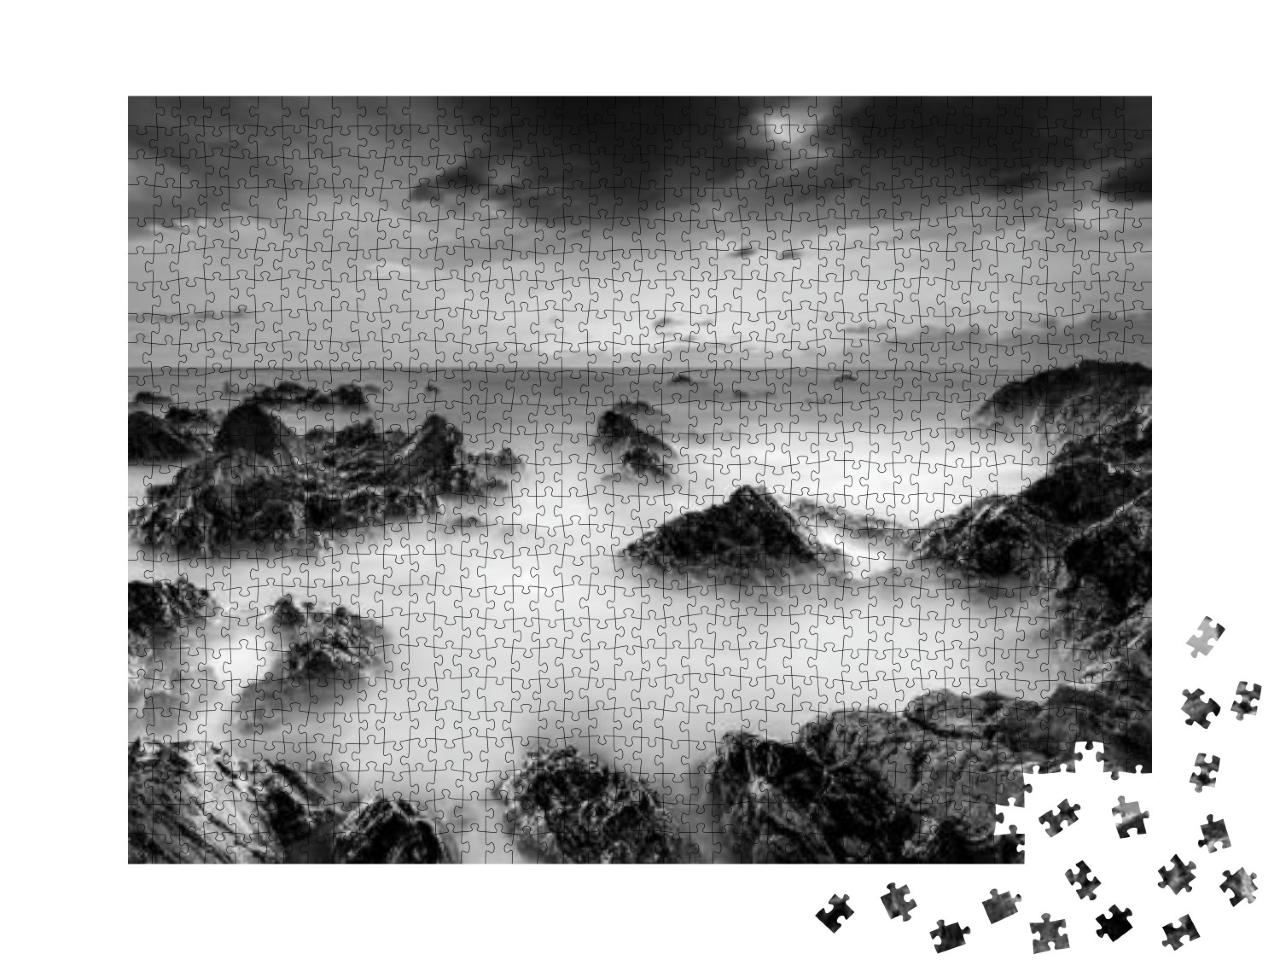 Long Exposure Seascape in Black & White. Panoramic Photog... Jigsaw Puzzle with 1000 pieces